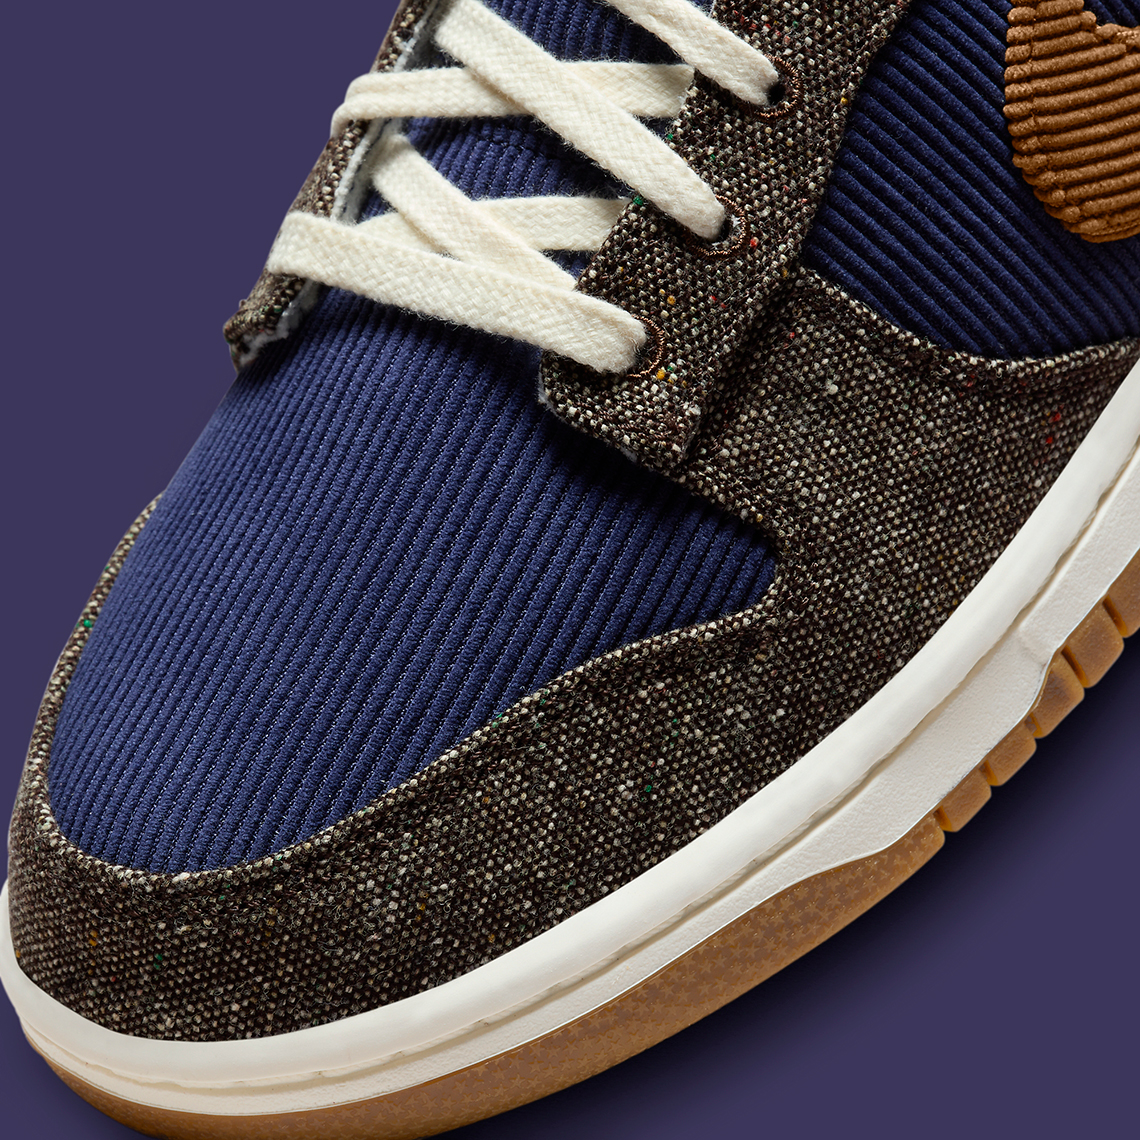 nike-dunk-low-midnight-navy-ale-brown-pale-ivory-fq8746-410-2.jpg